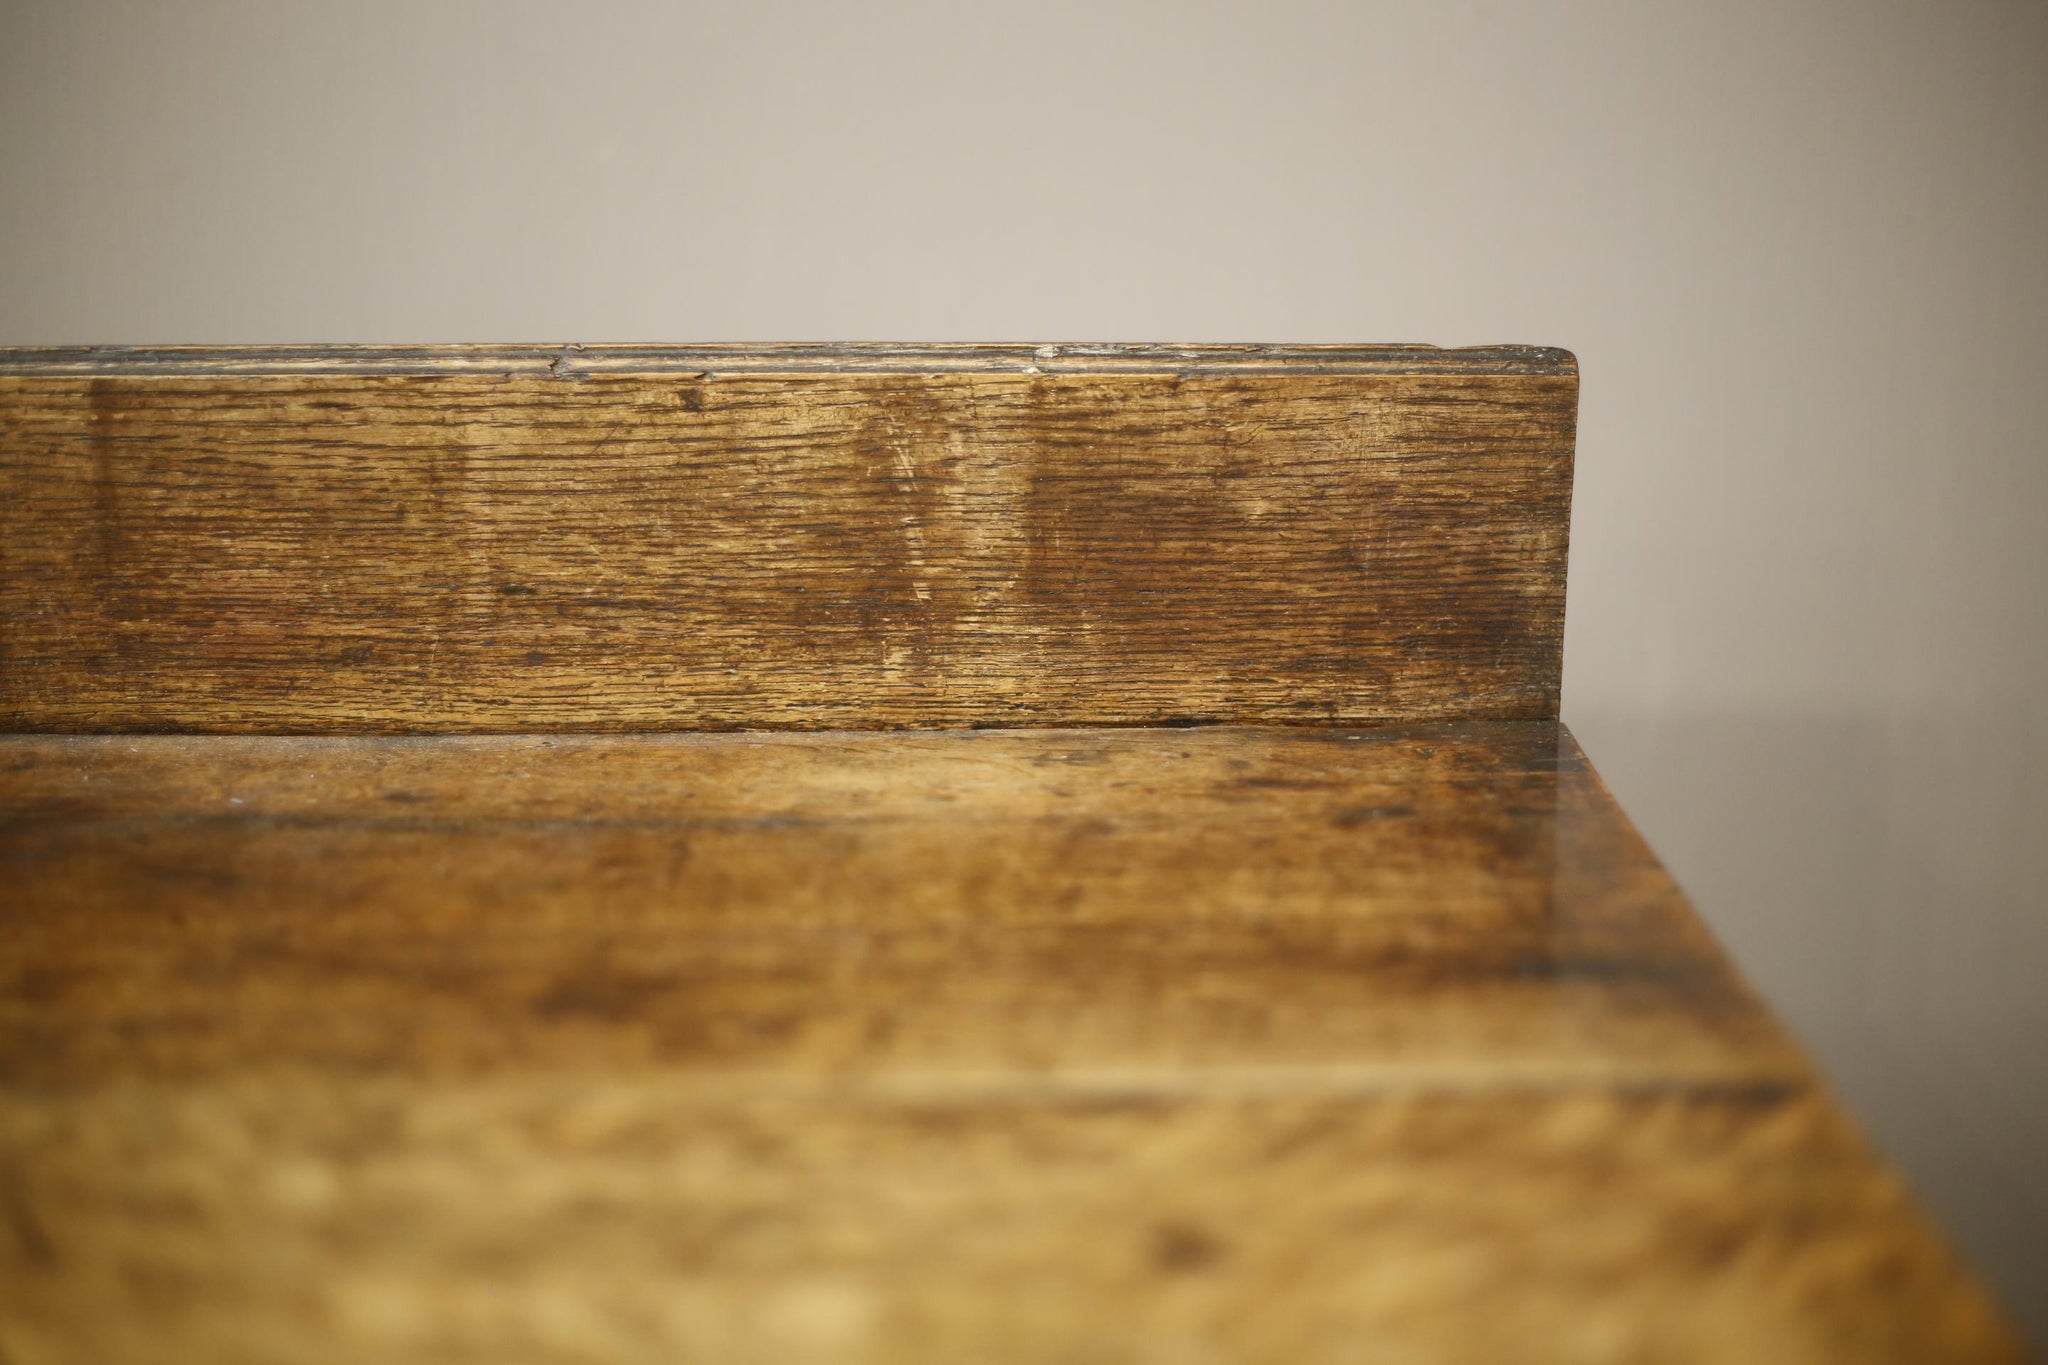 18th century oak dresser base with scalloped front rail